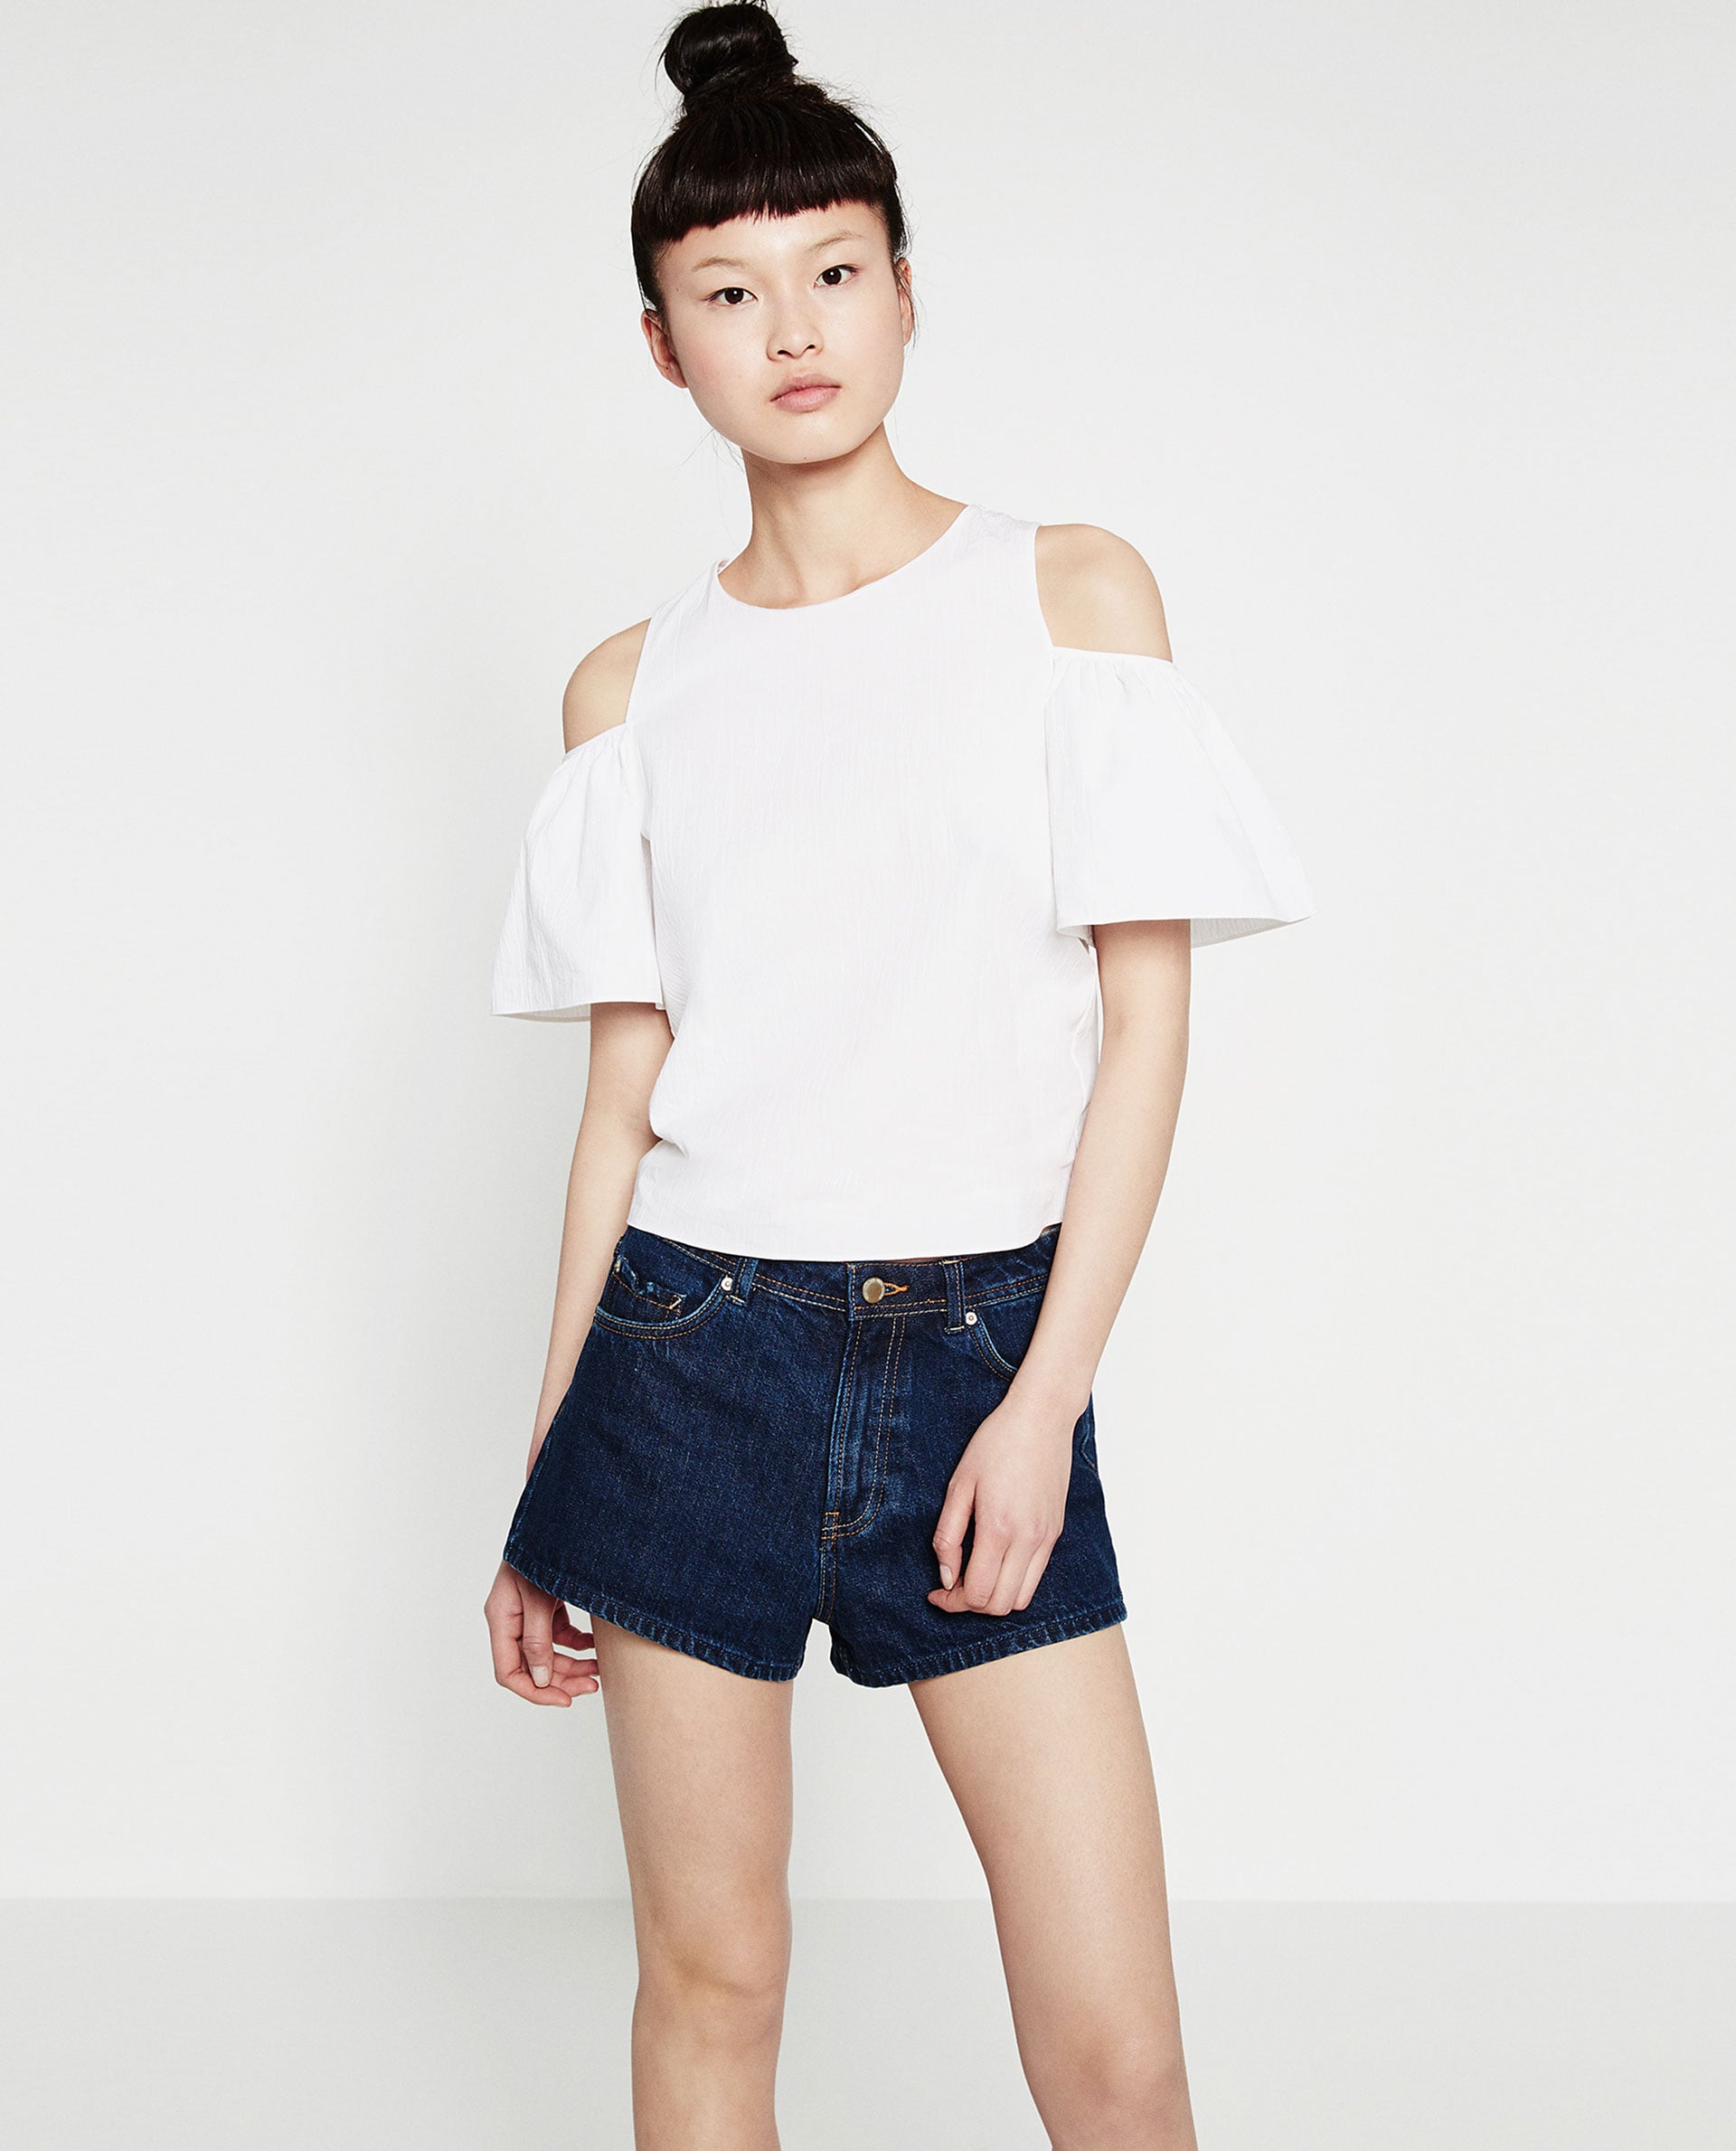 Zara Shoulder Top ($36) | The Sexy, Easy-to-Wear Top That's a Spring Staple | POPSUGAR Fashion Photo 12